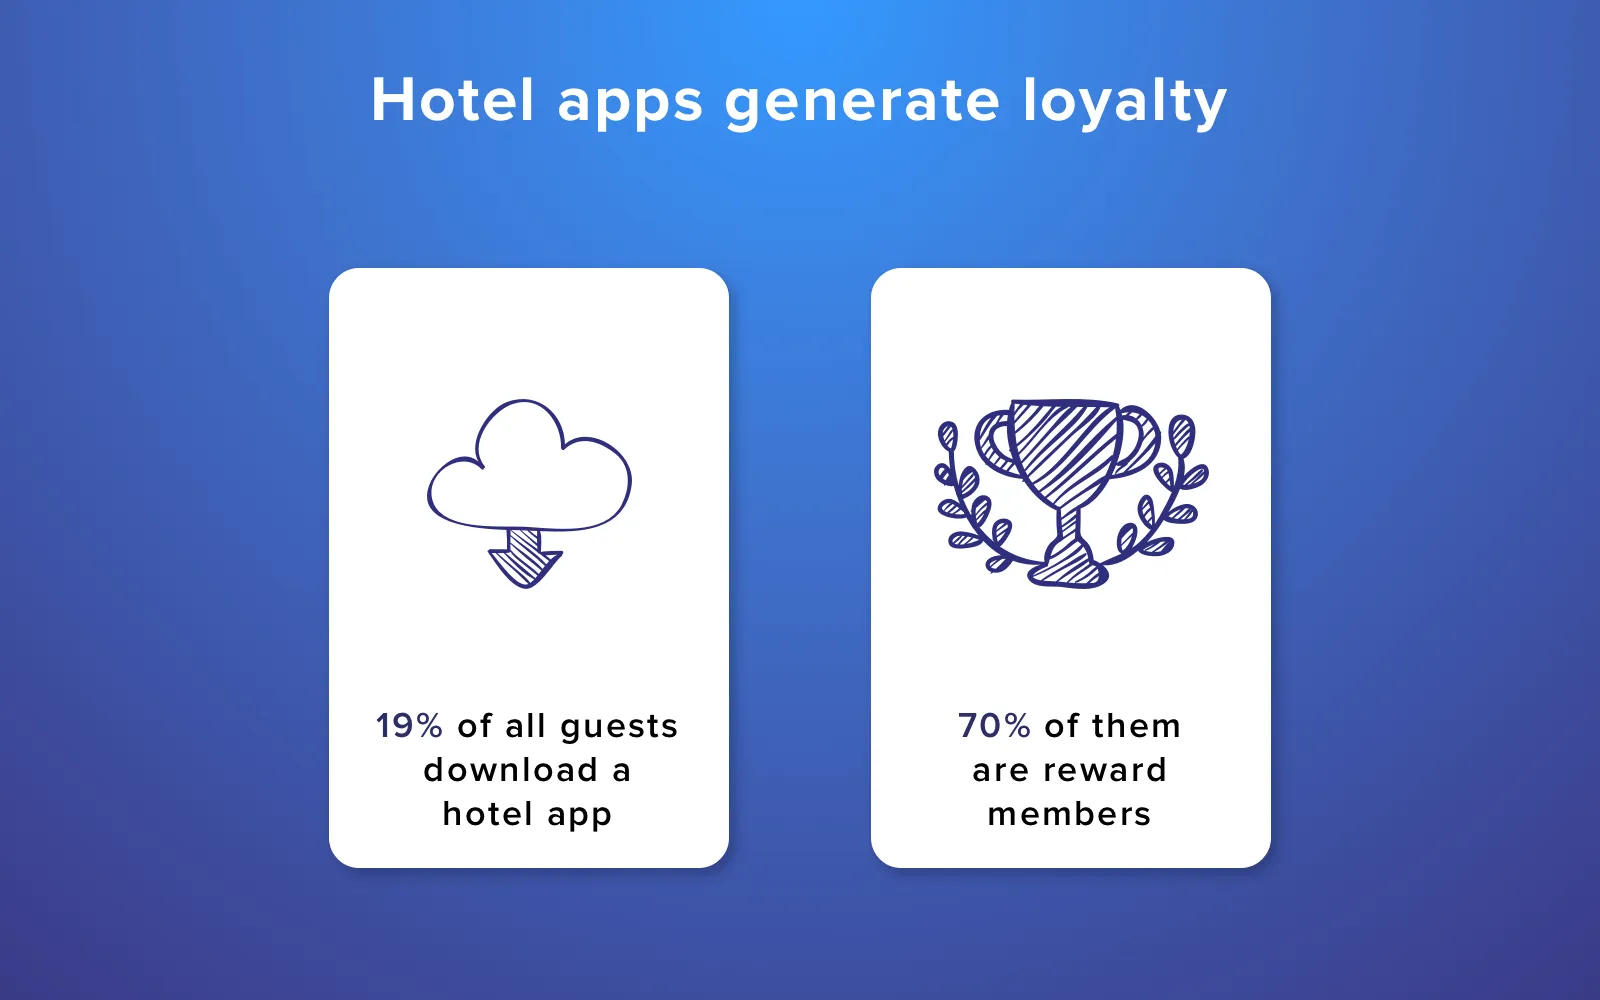 Hotel applications generate loyalty